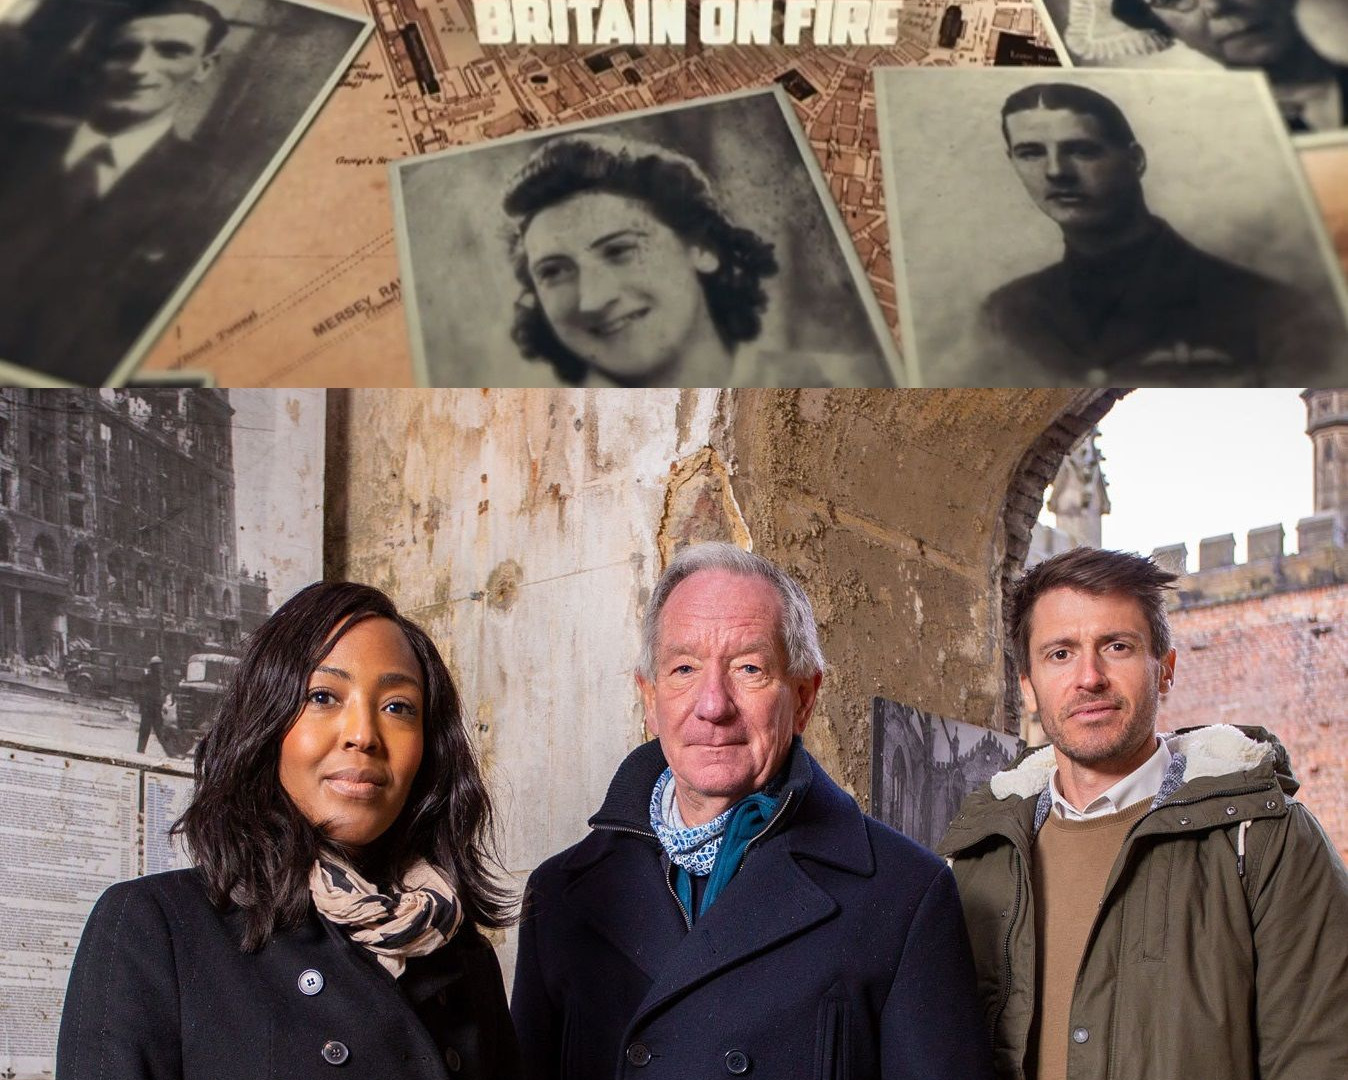 Show The Blitz: Britain on Fire